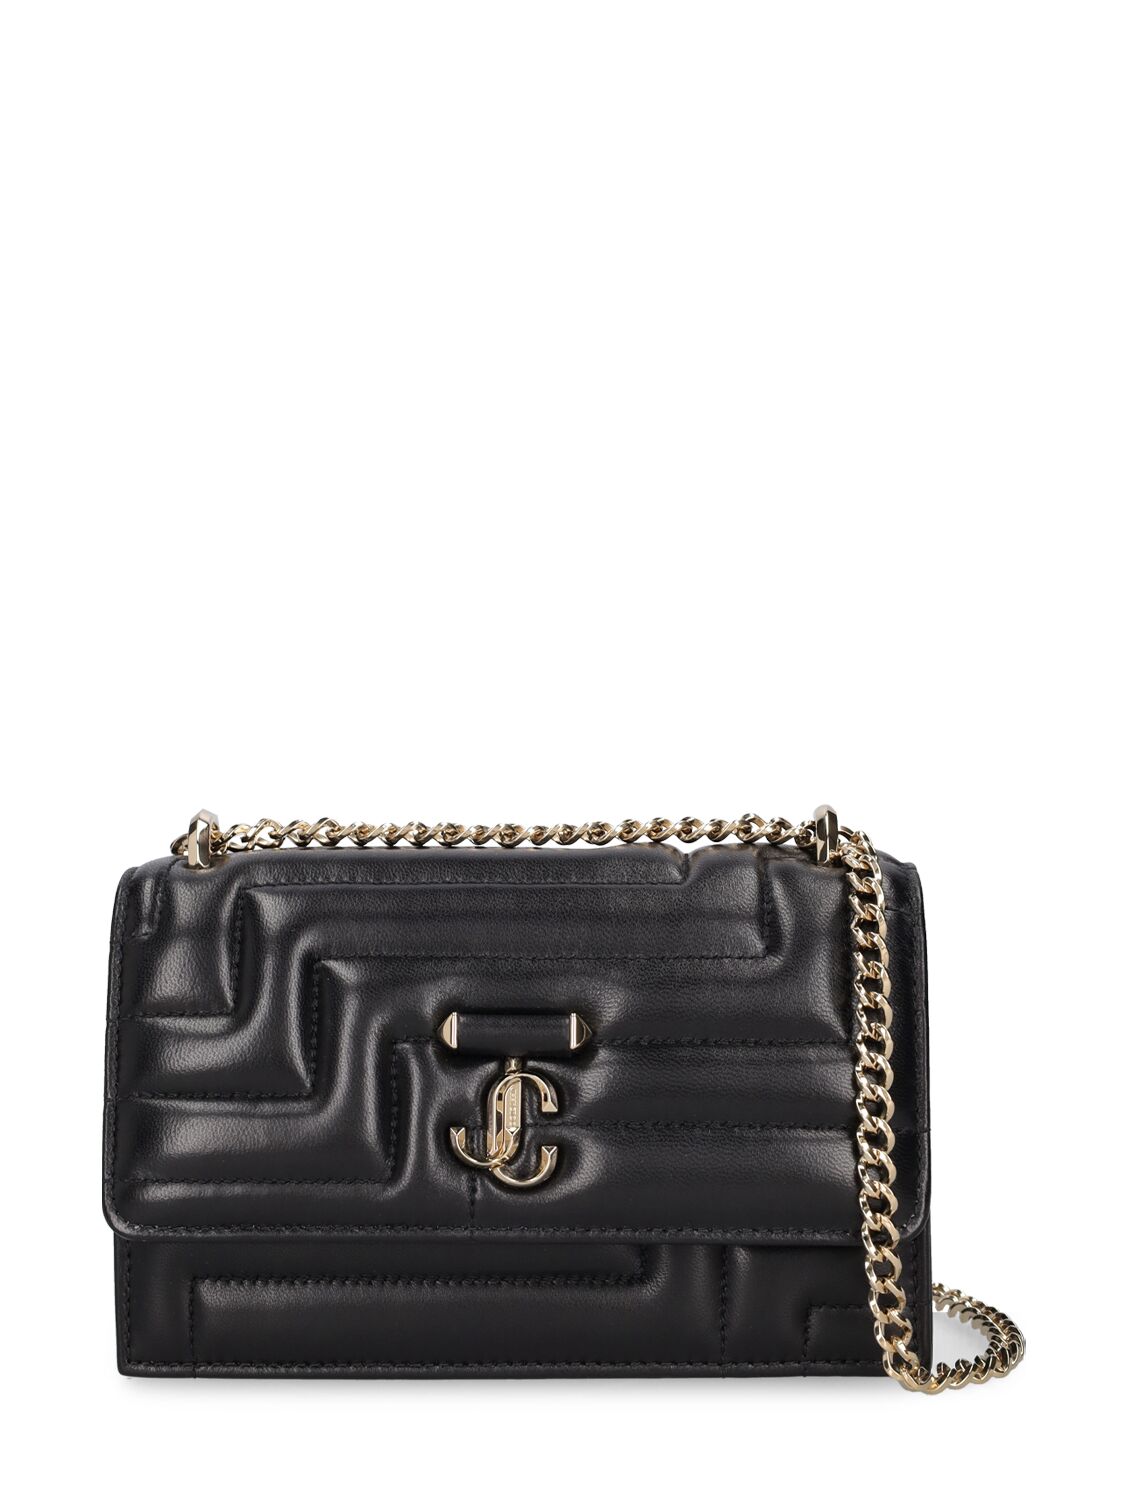 Jimmy Choo Bohemia Quilted Napa Leather Bag In Black